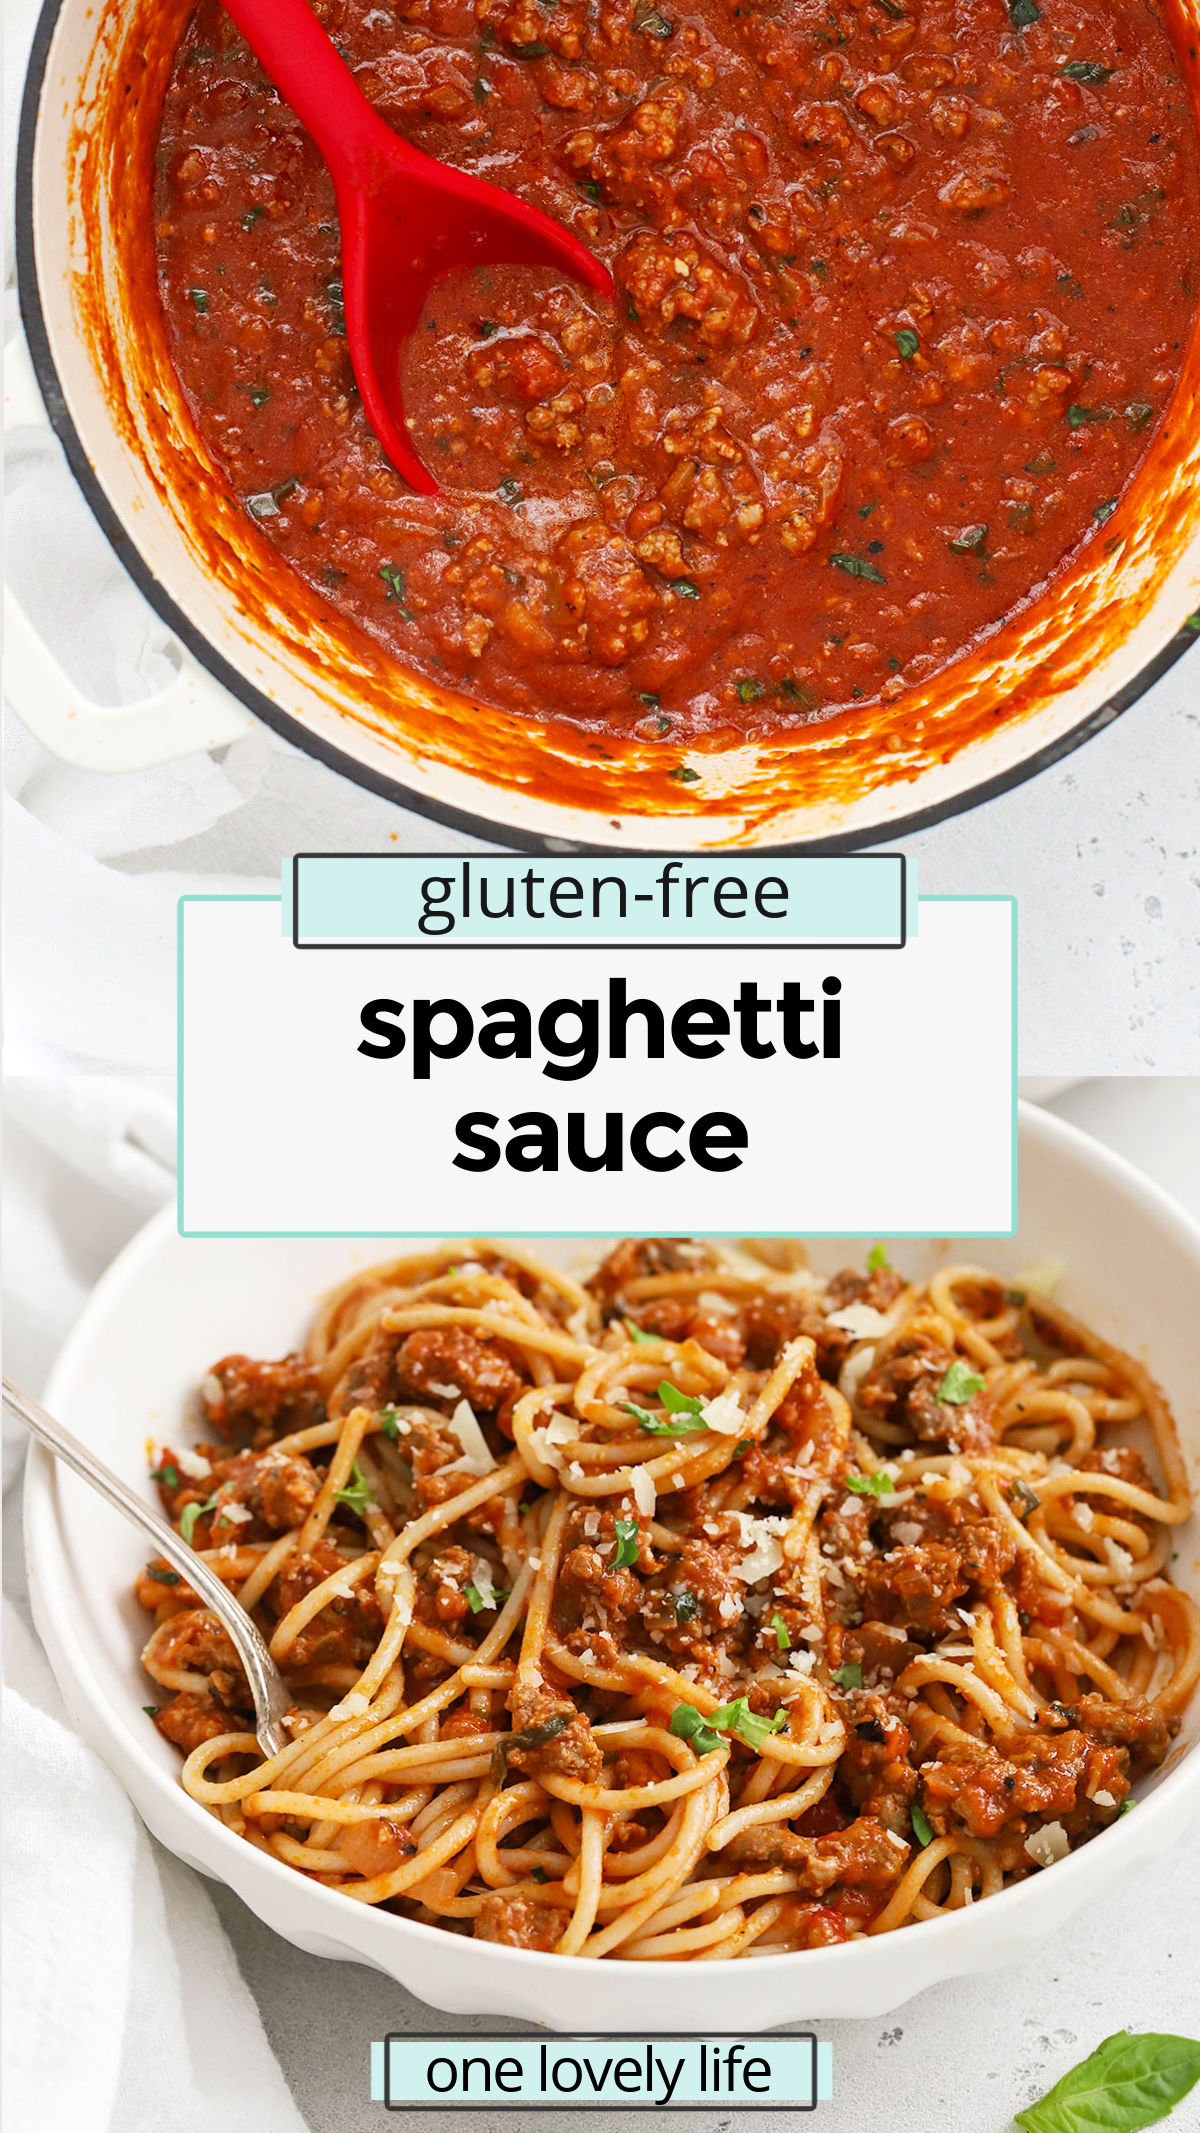 This gluten-free spaghetti sauce recipe is has all the classic flavor you crave. Perfect for feeding a crowd or freezing some for another day! // homemade gluten-free spaghetti sauce / gluten-free meat sauce for spaghetti / gluten-free spaghetti sauce brands / gluten-free spaghetti sauce from scratch / gluten-free pasta recipe / gluten-free spaghetti recipe / gluten-free spaghetti dinner / gluten-free freezer meal